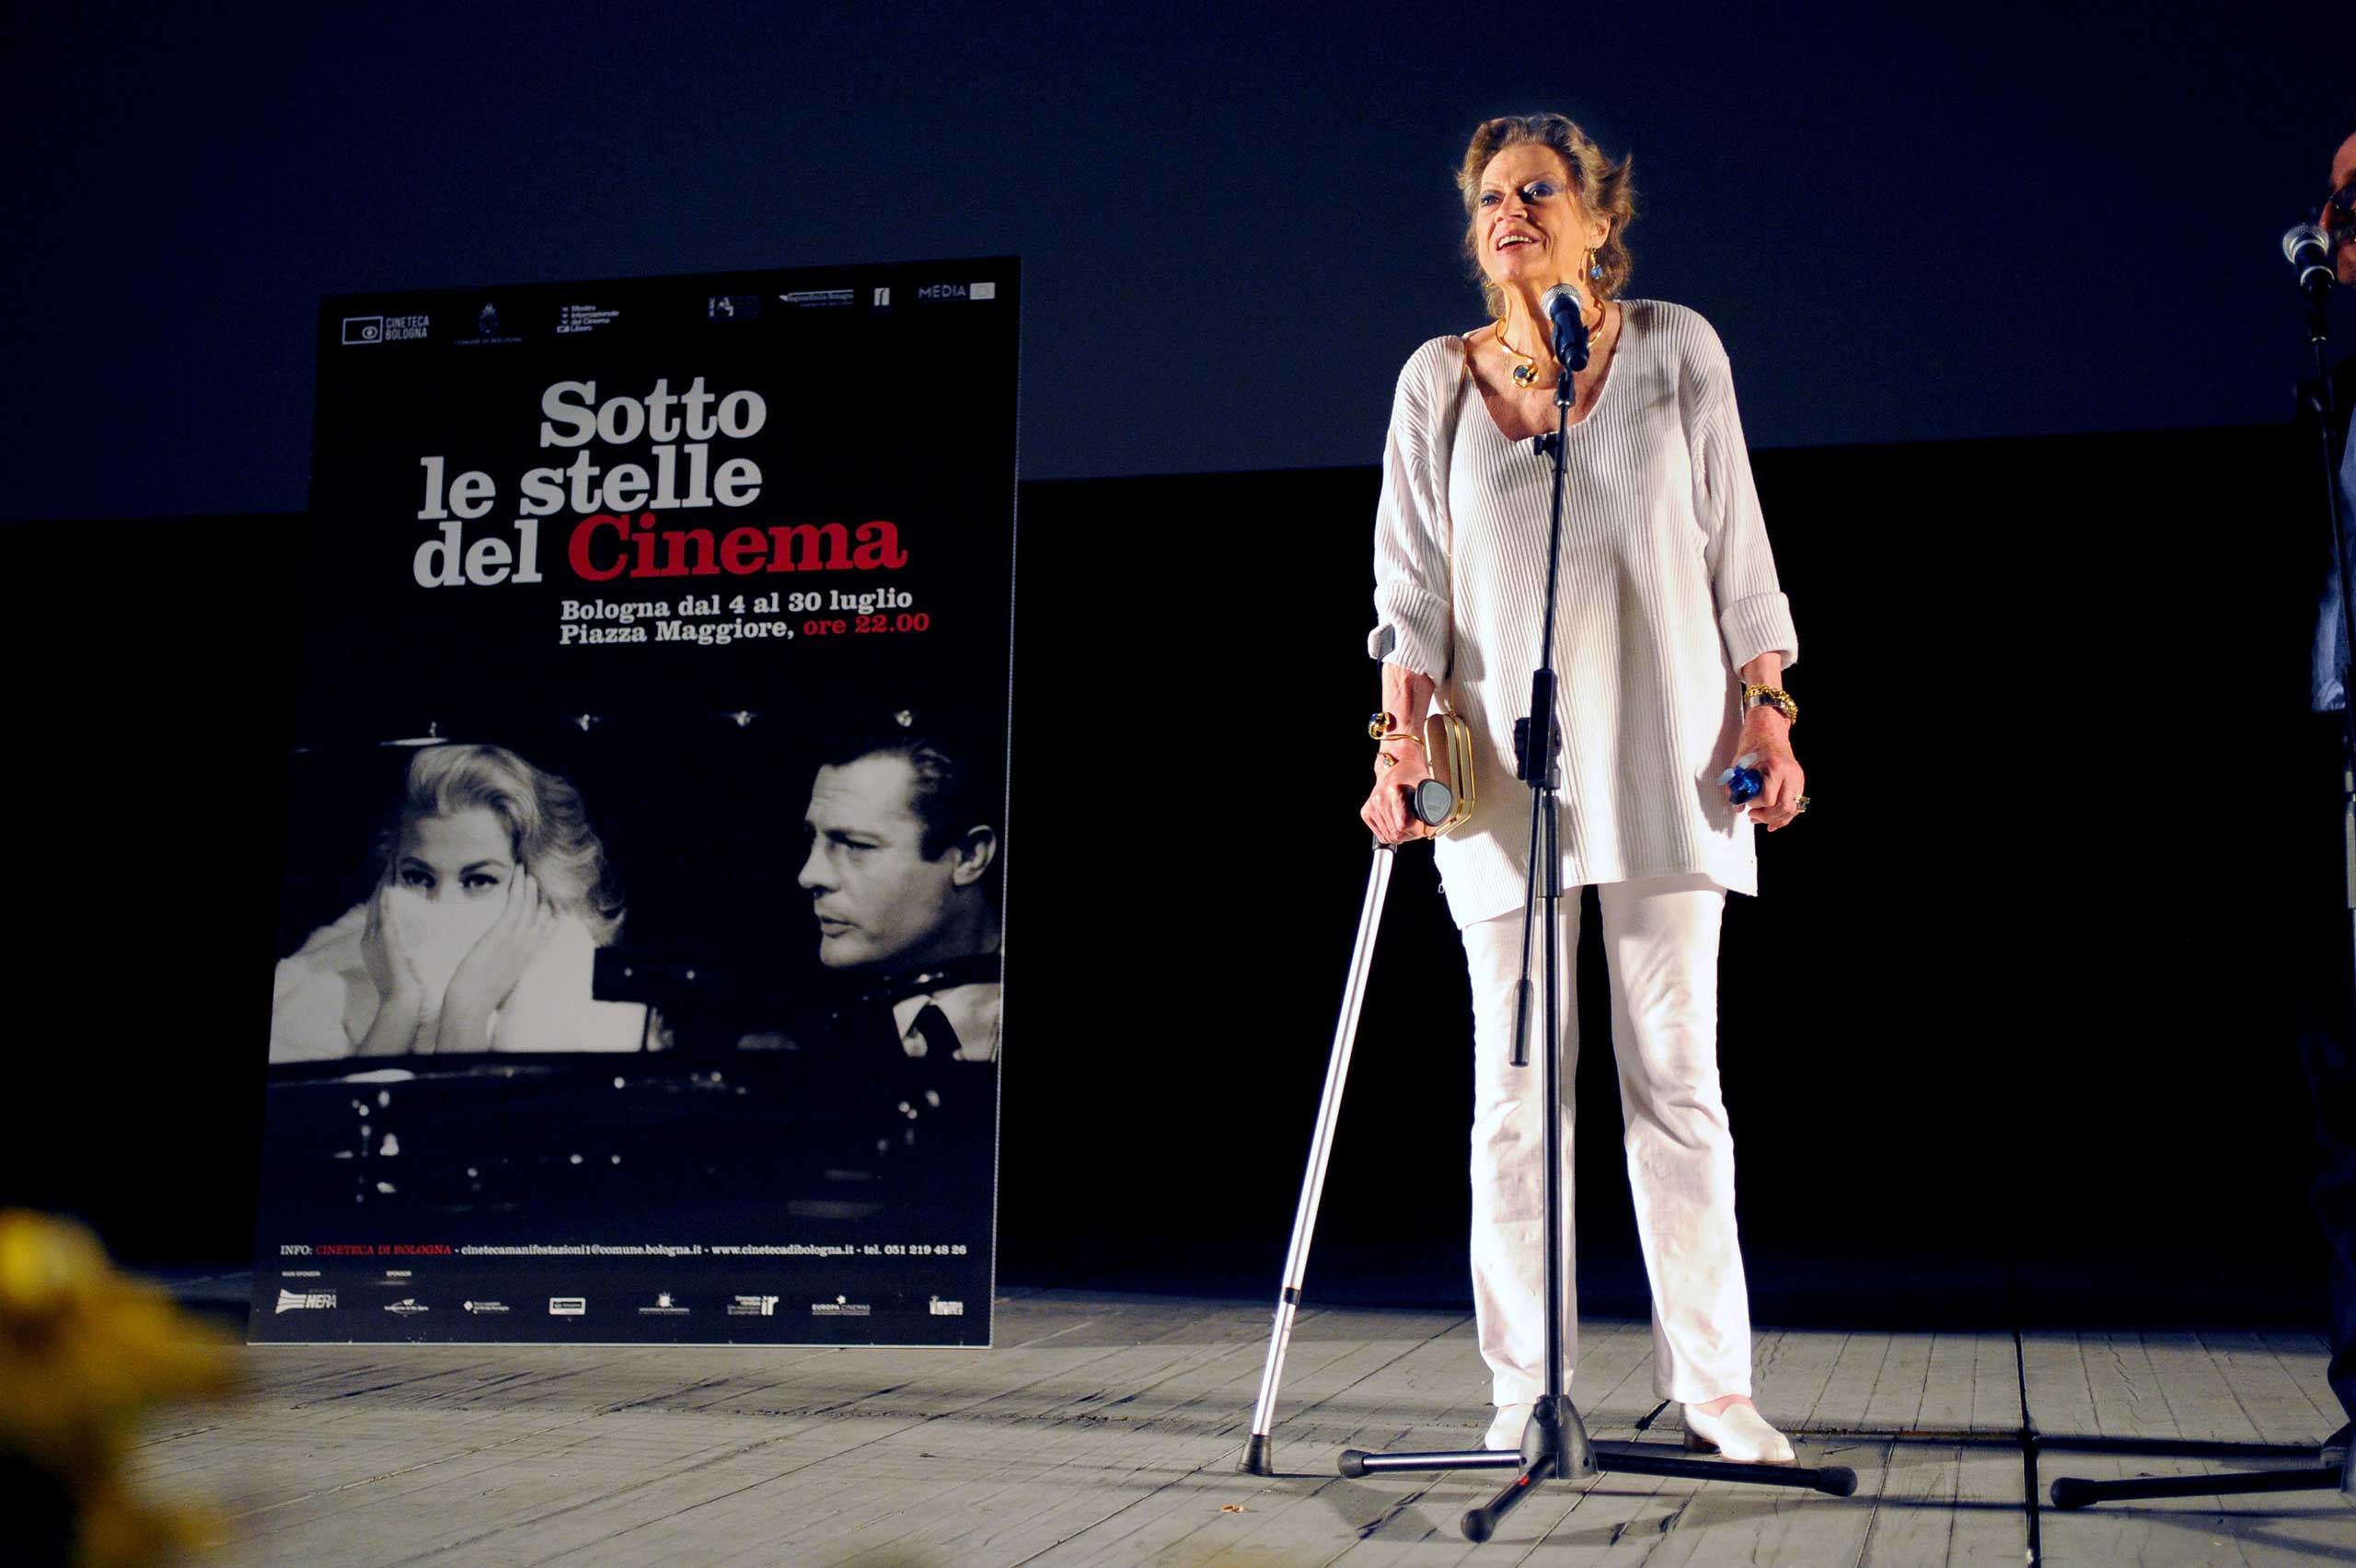 Ekberg attends a screening of the restored version of La Dolce Vita, posing next to a poster featuring herself and co-star Mastroianni ,at the Piazza Maggiore on July 6, 2010 in Bologna.